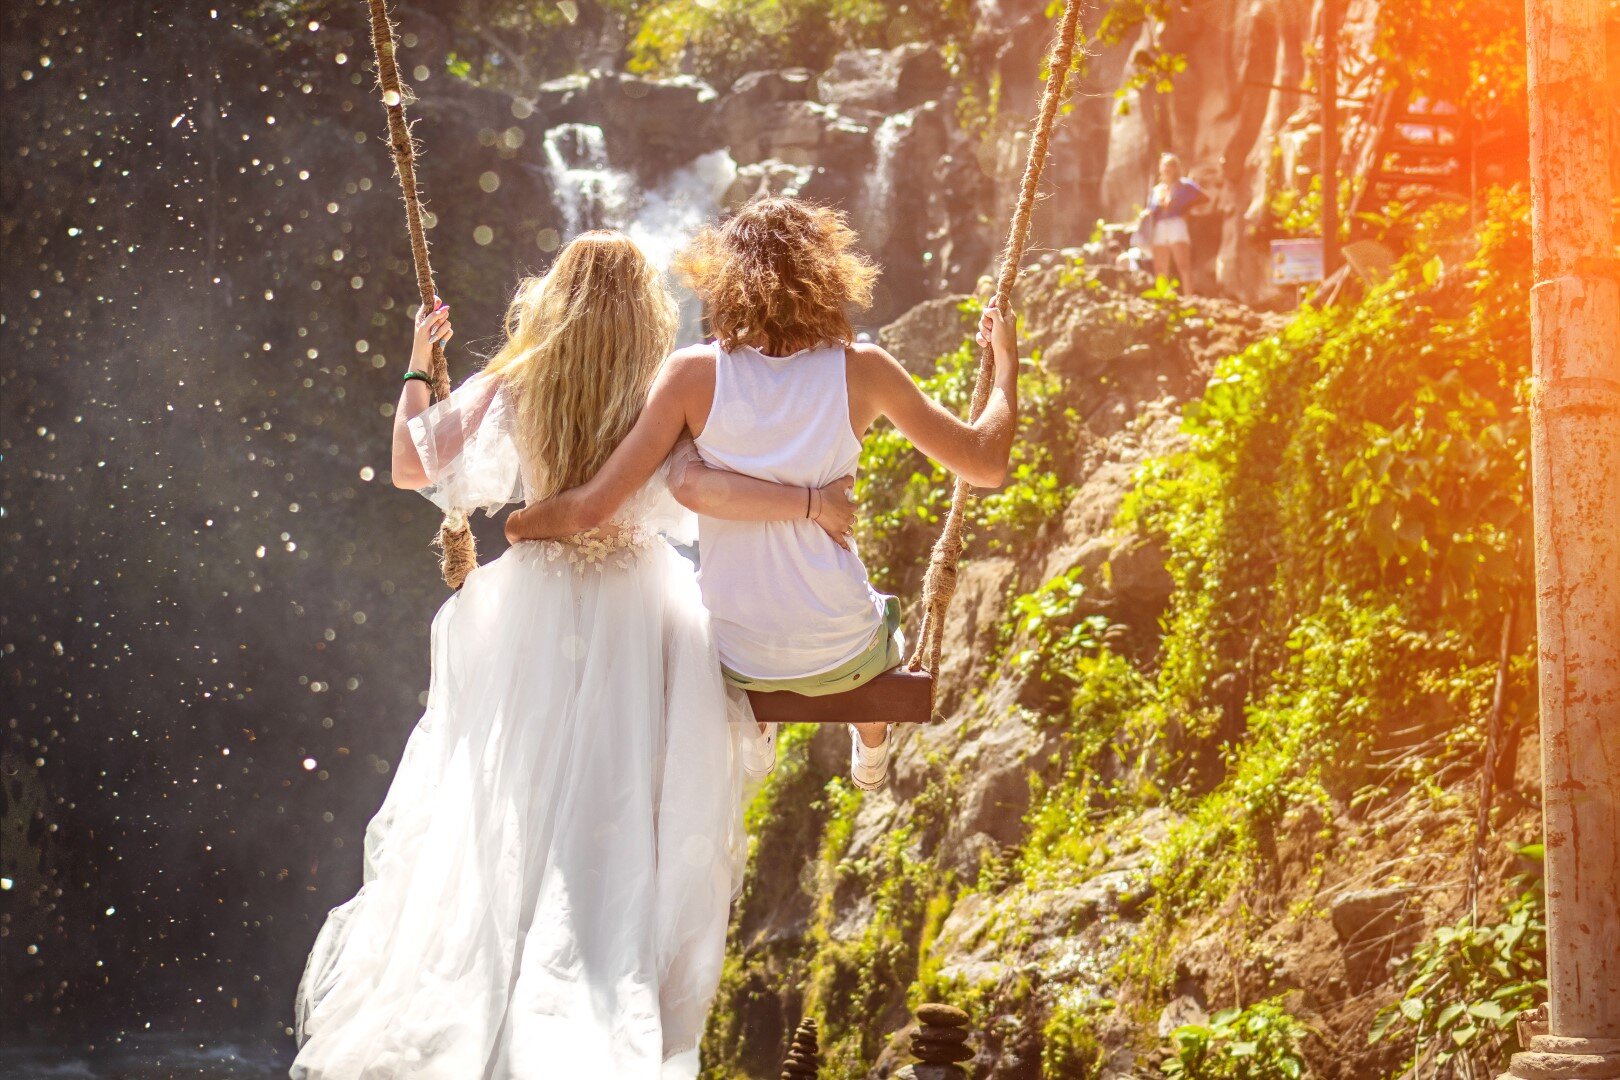 Canva - Woman and Woman Riding Wooden Swing in Front of Rock Formation.jpg